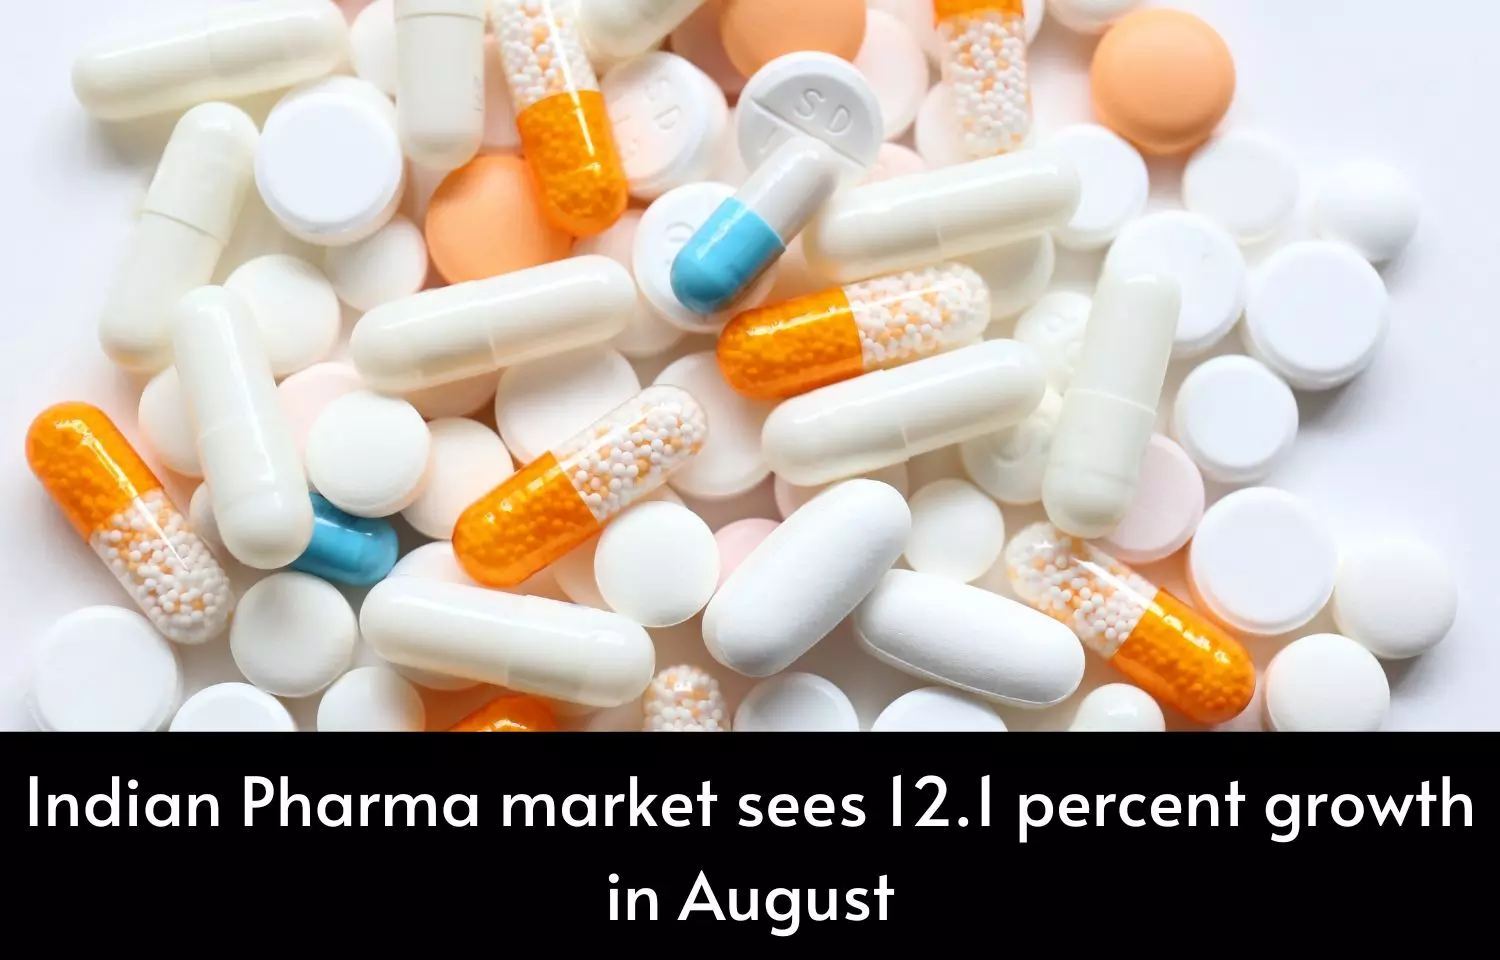 Indian Pharma market sees 12.1 percent growth in August: AIOCD-AWACS Report